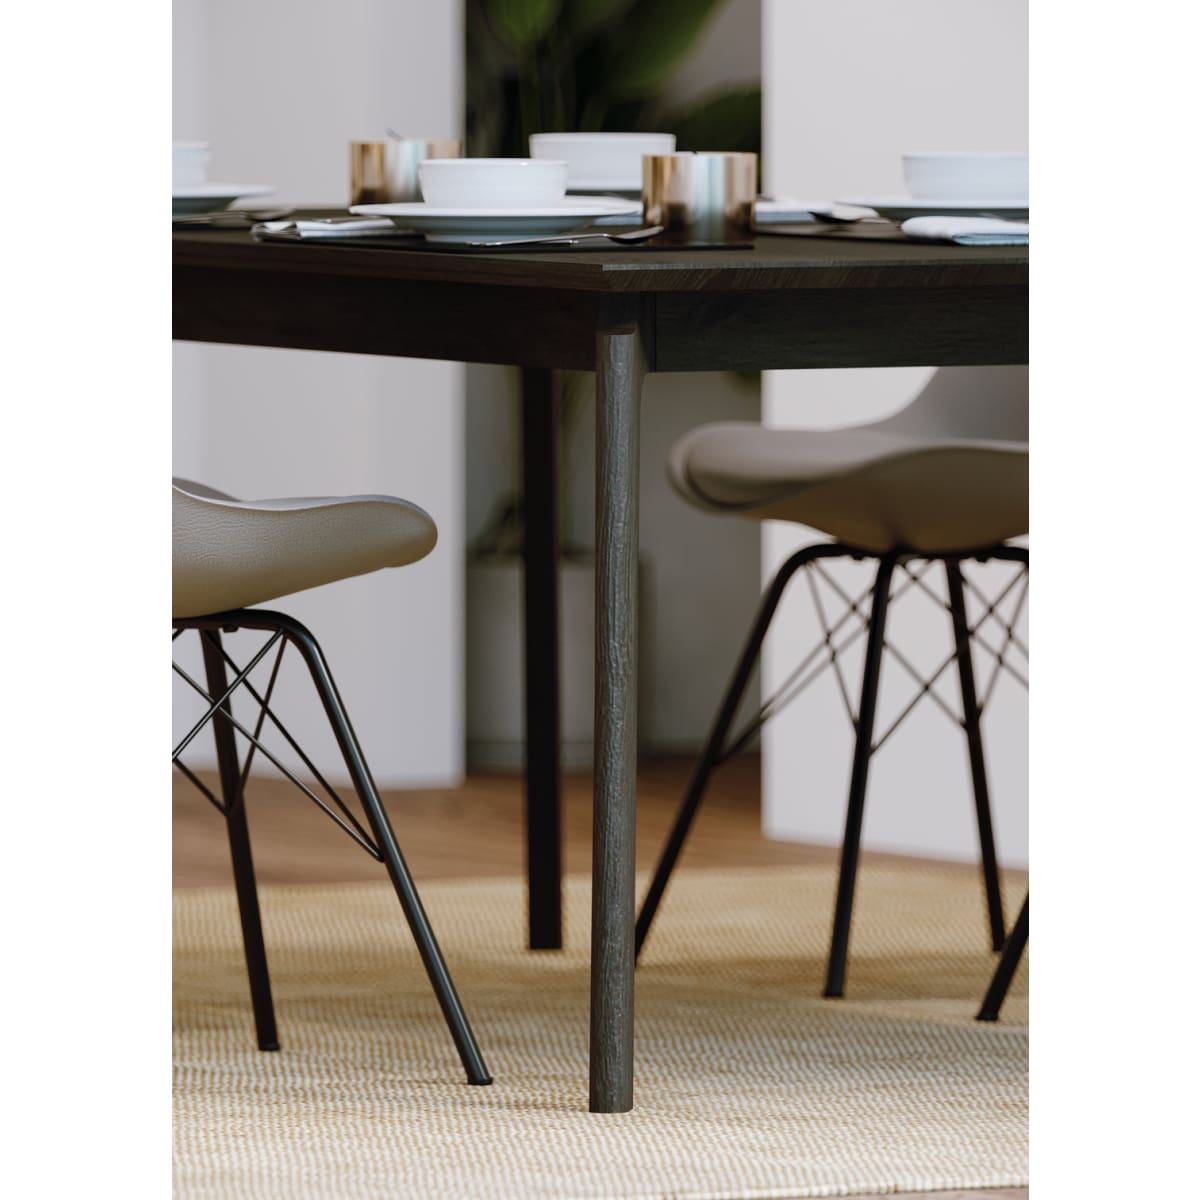 Kenzo Dining Table 71” - Black - lh-import-dining-tables